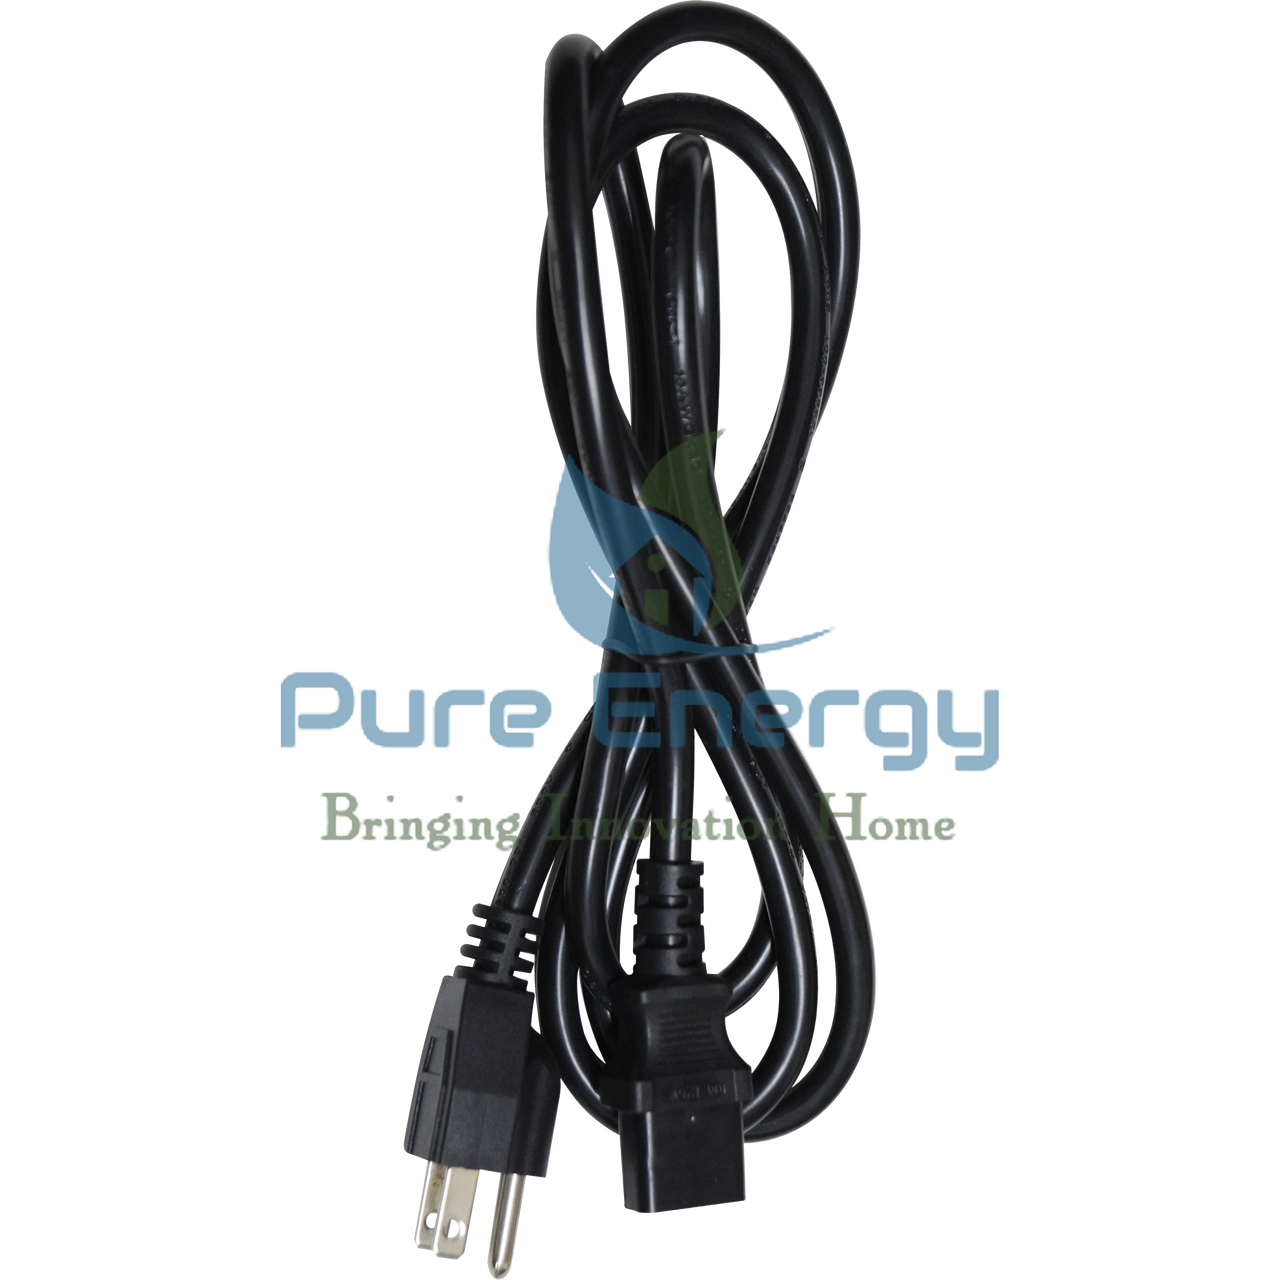 Replacement Power cord for Air Purifier
